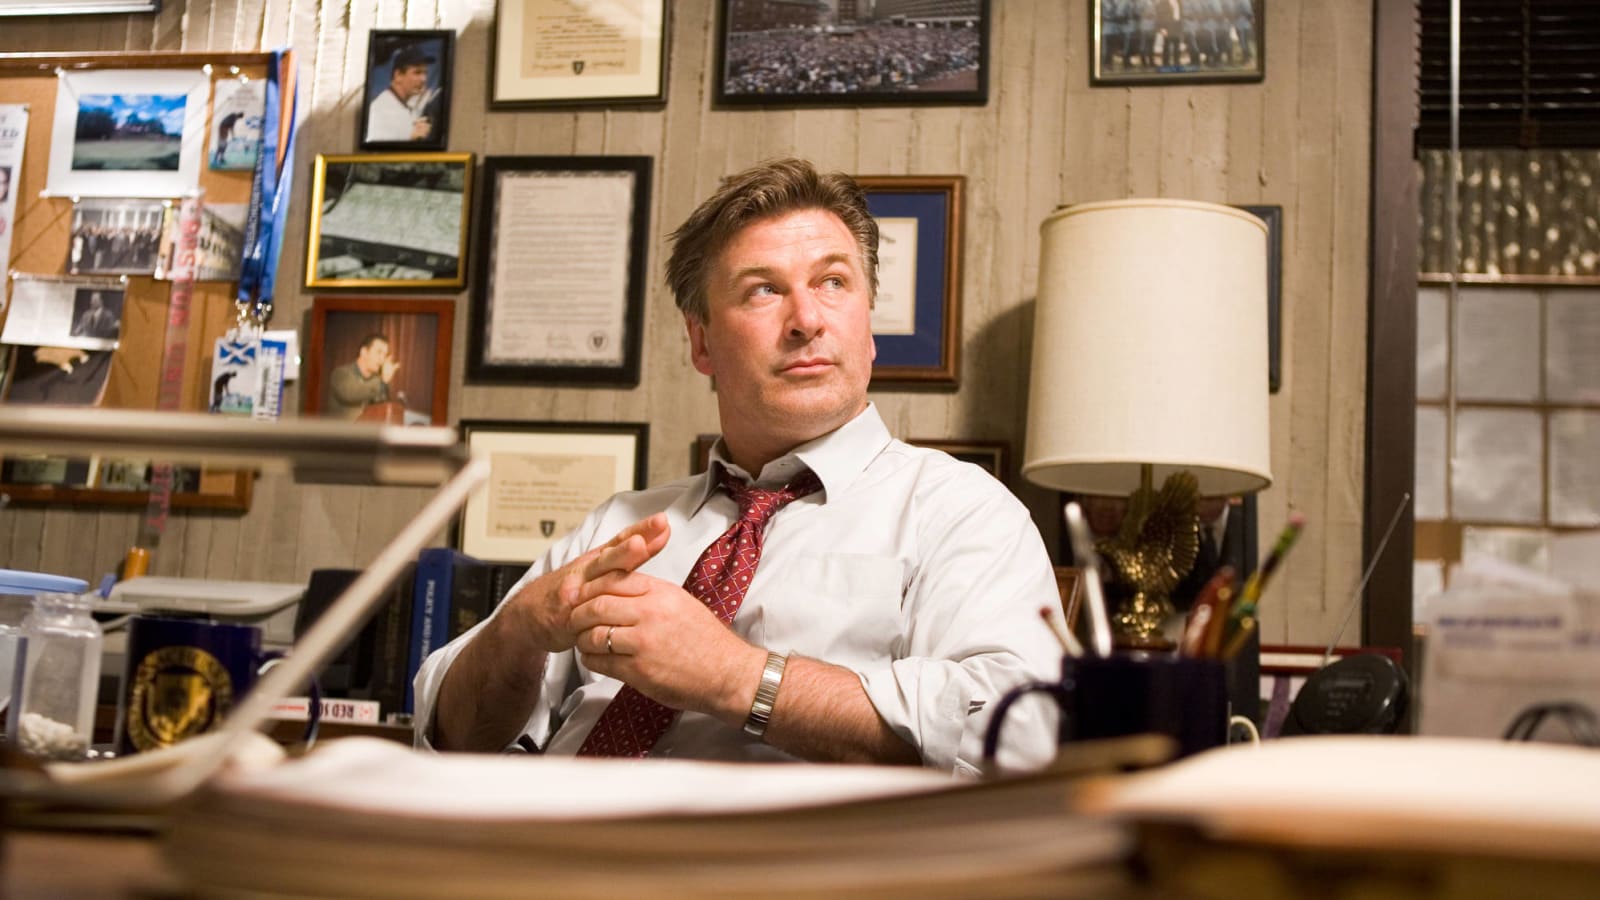 Alec Baldwin reveals the 'Sopranos' role he pitched but never got to play